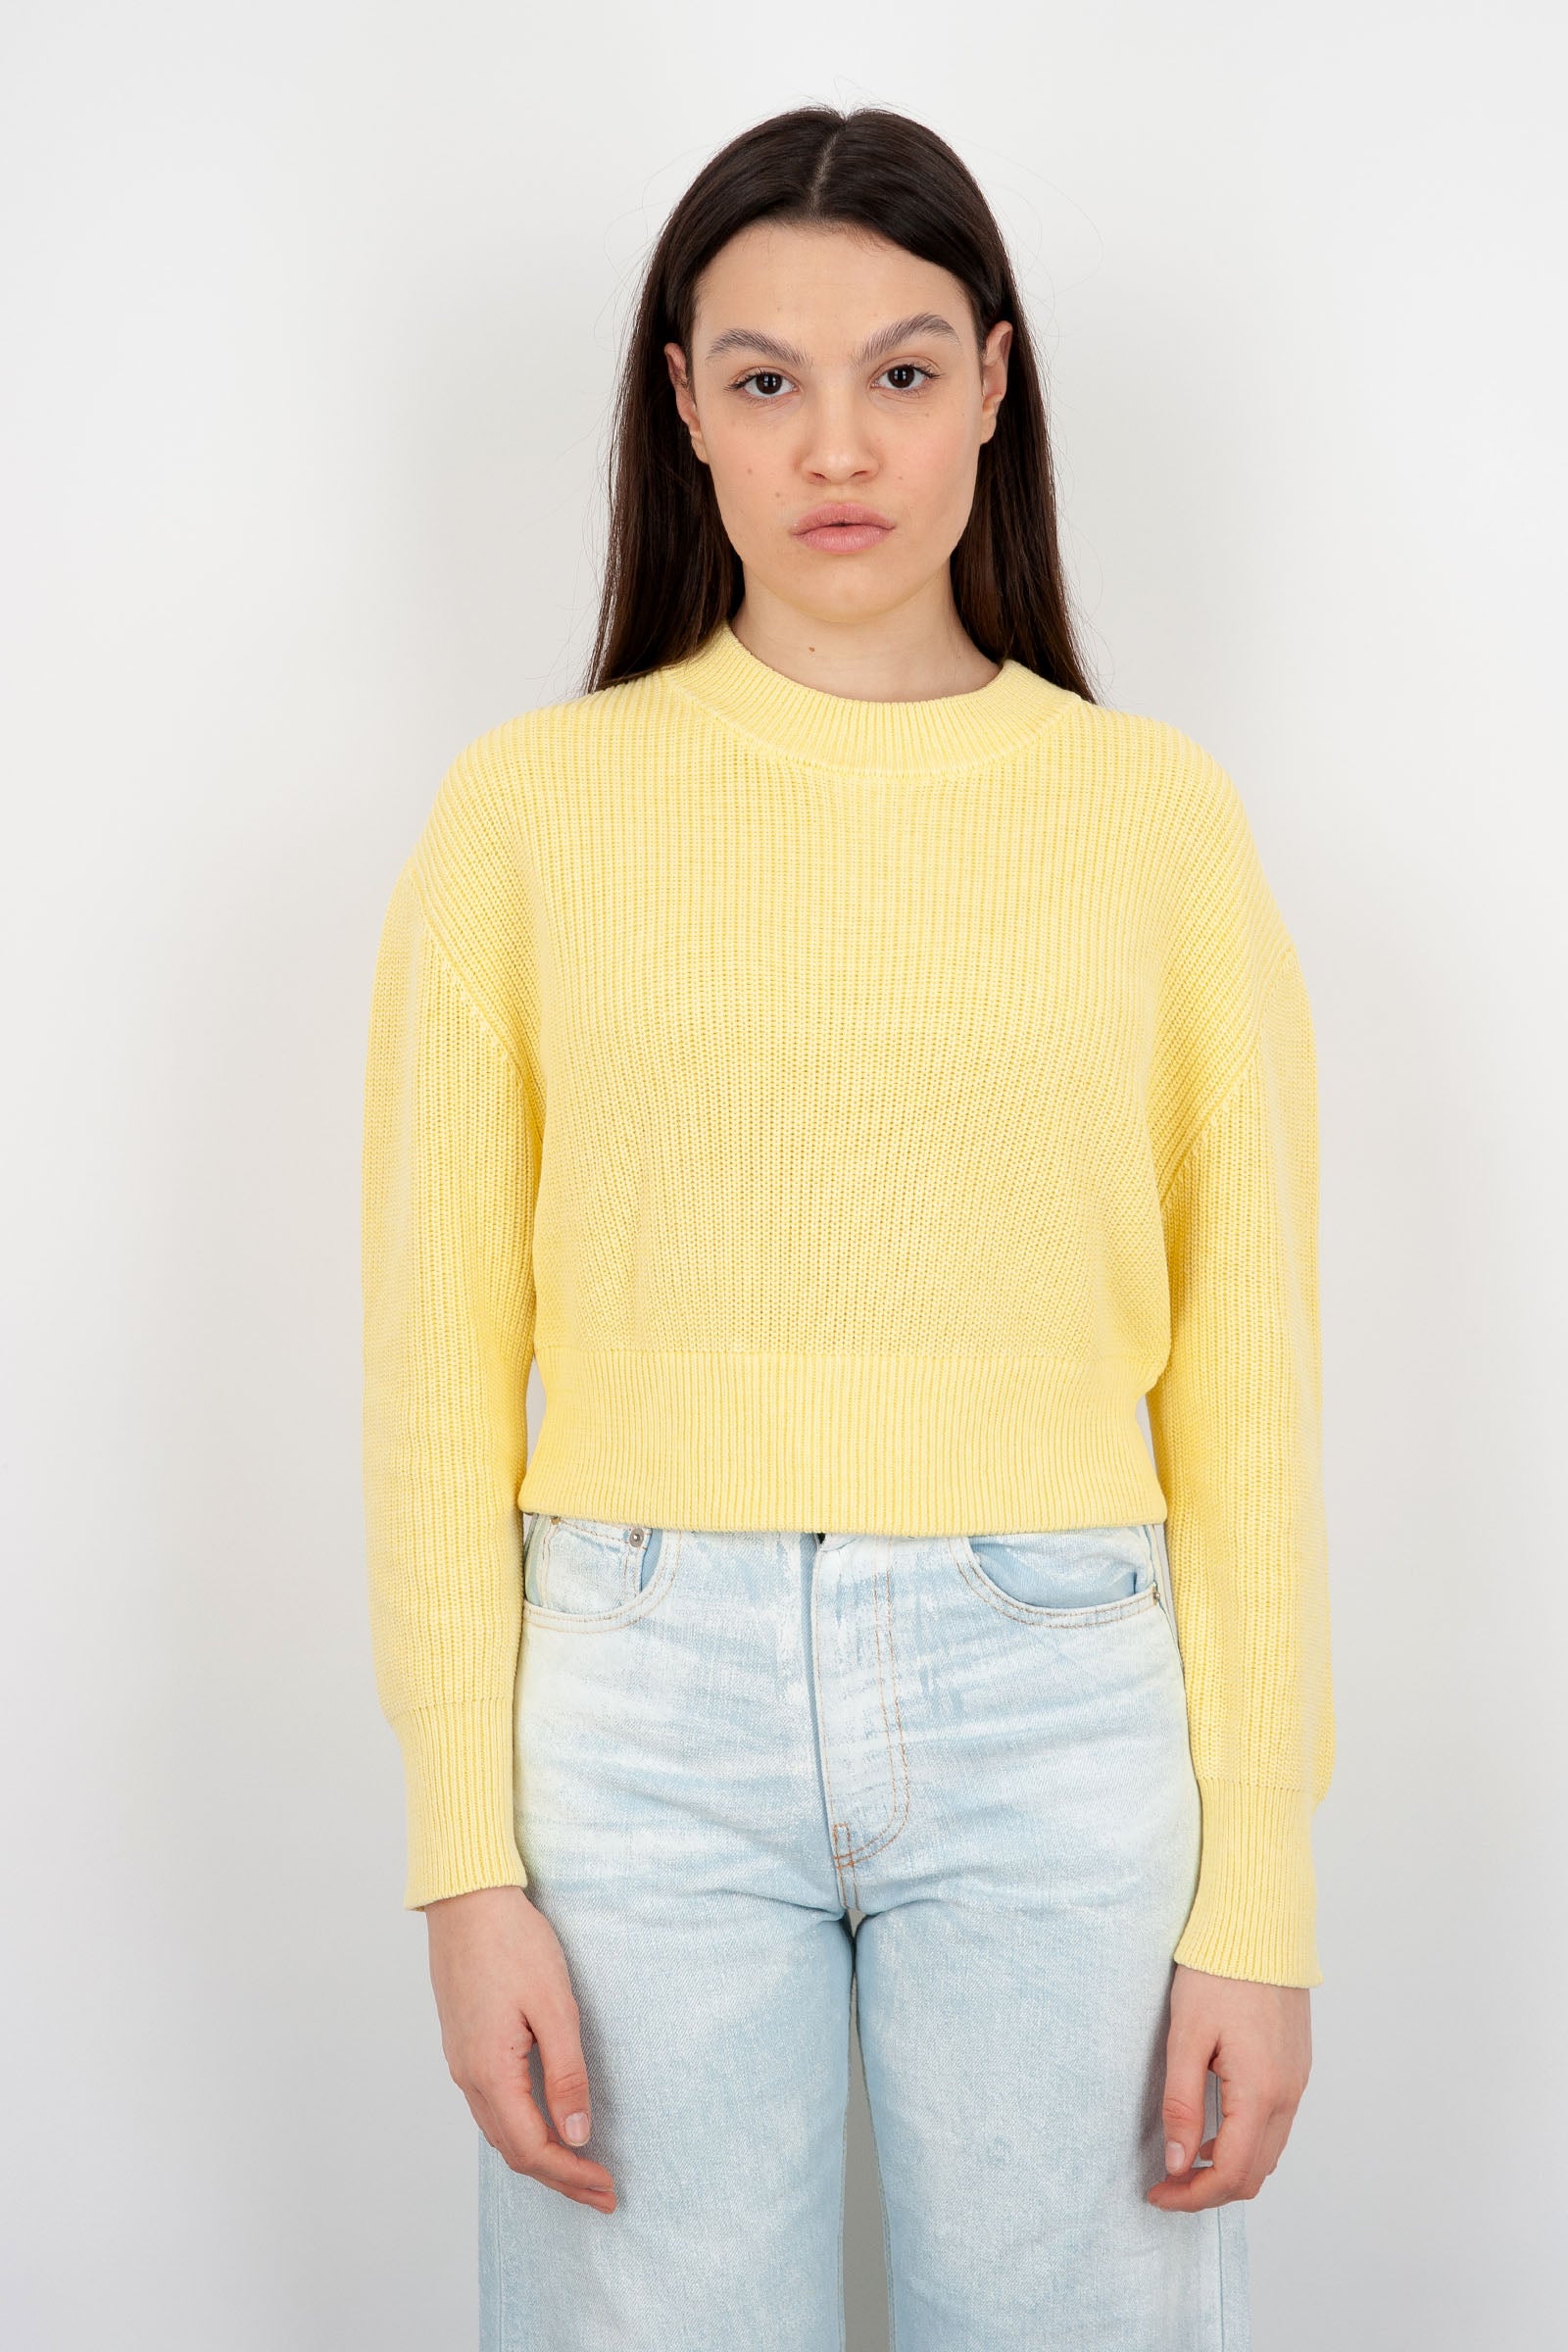 Absolut Cashmere Edith Cotton Yellow Sweater - 1